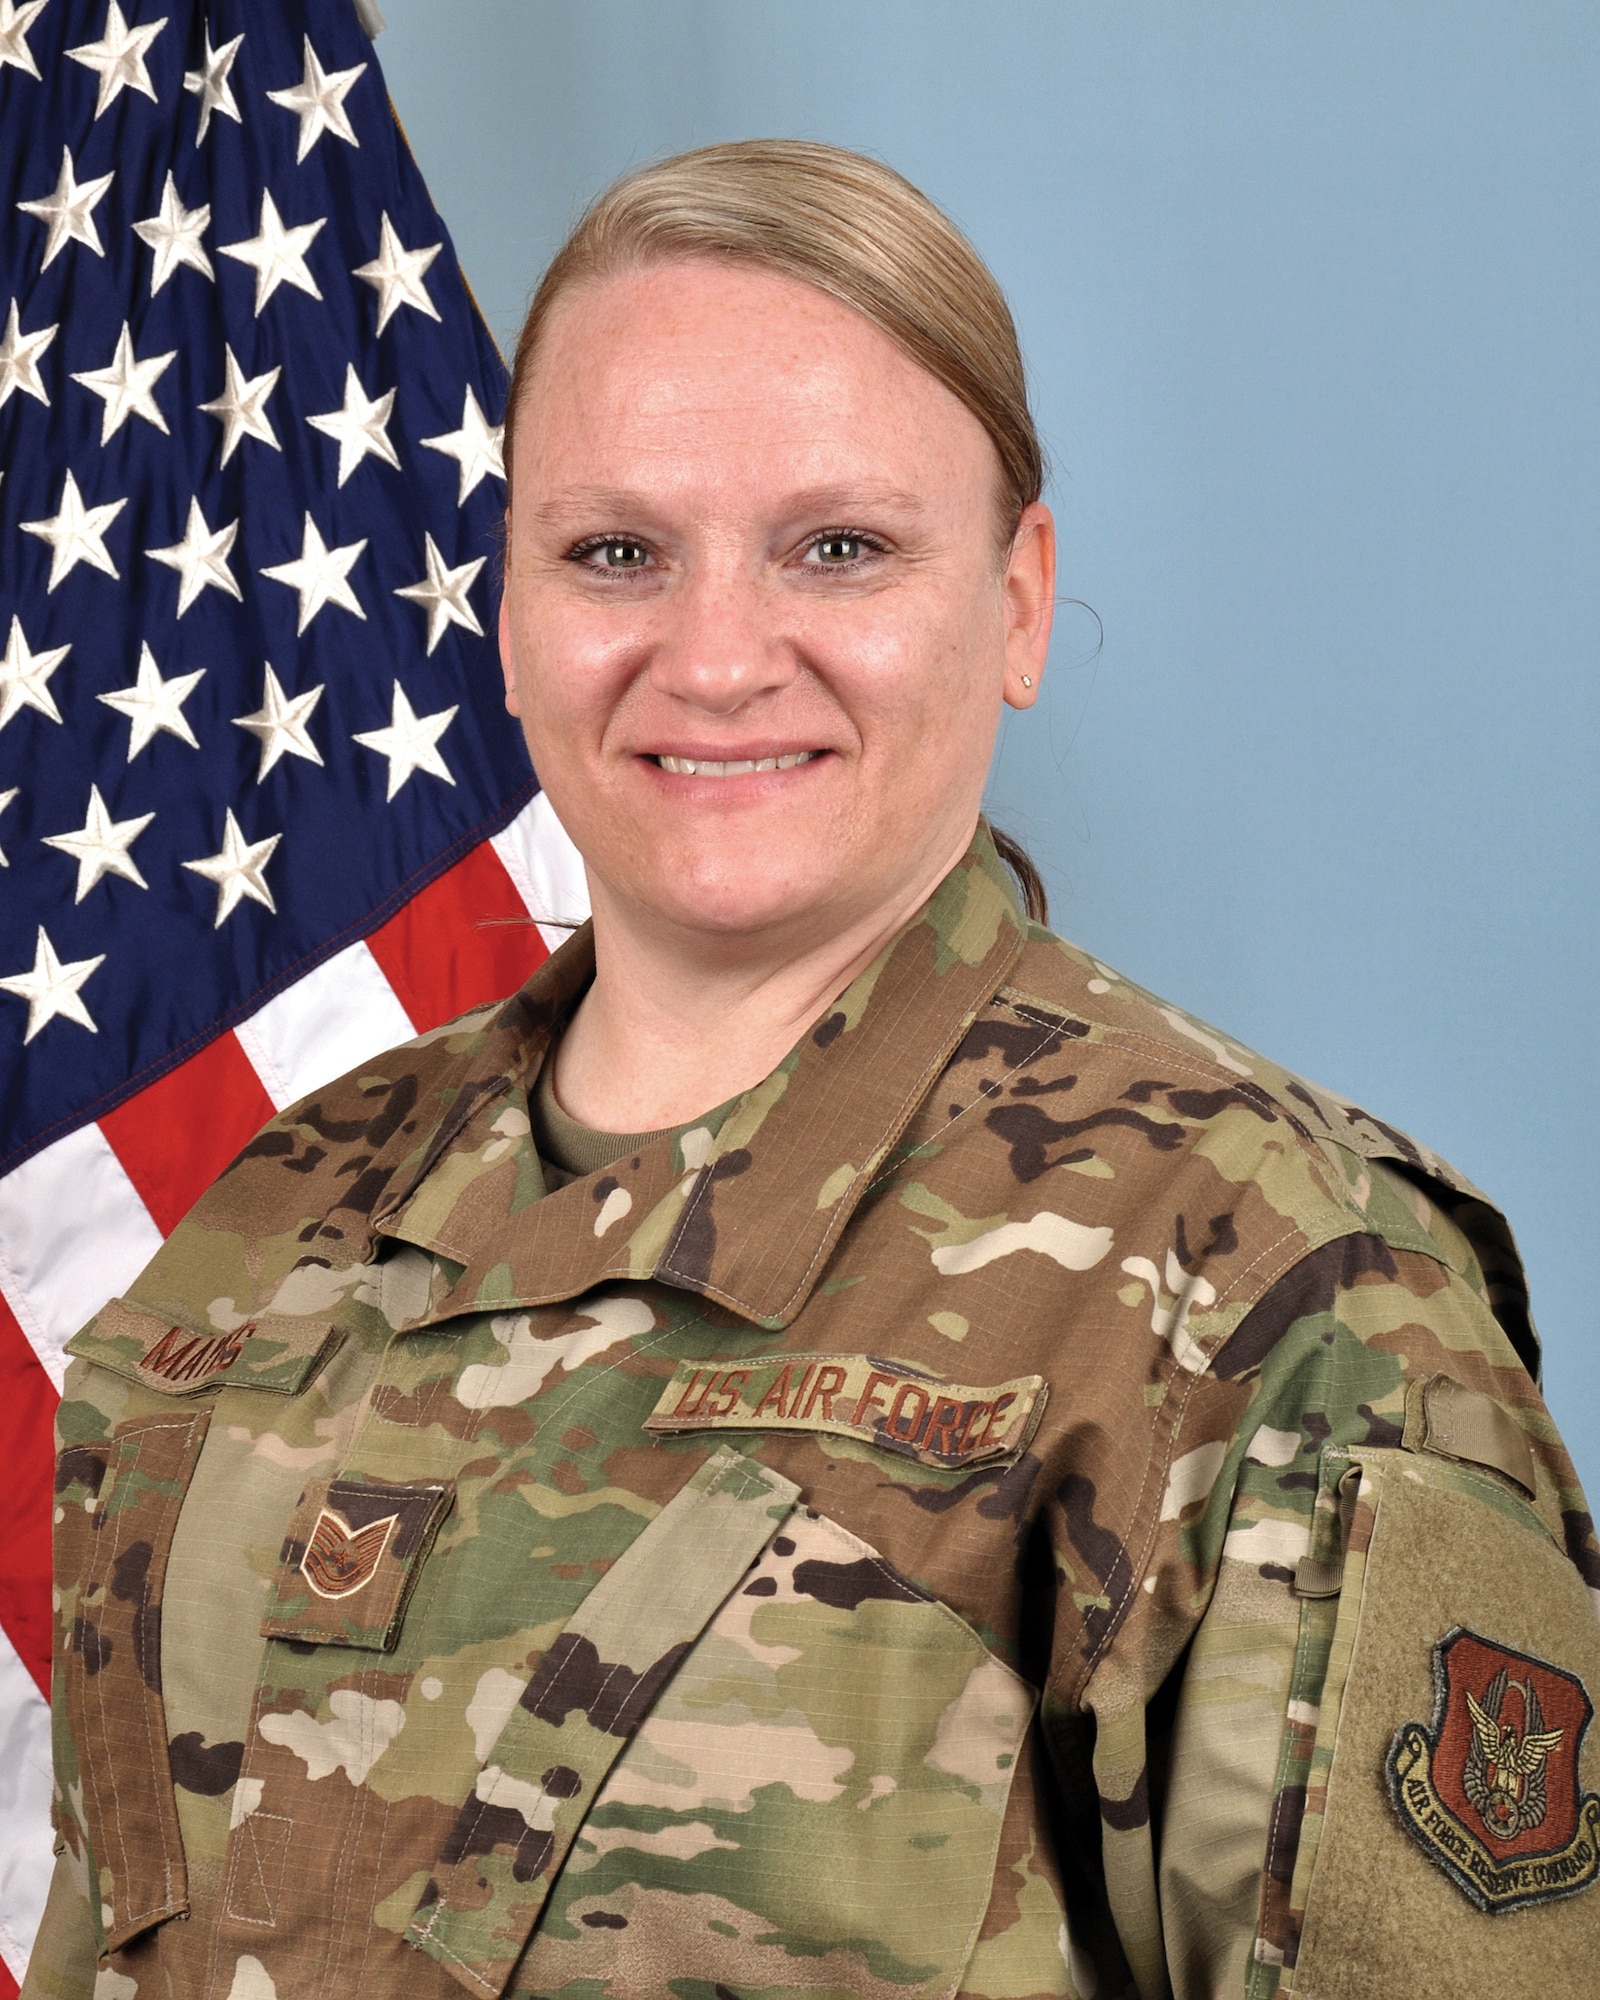 Tech. Sgt. Misty Mayes, 445th Airlift Wing Judge Advocate General Office law office manager, won the Air Force Reserve Command Outstanding Air Reserve Component NCO Paralegal of the Year award. The announcement was made March 5, 2021.